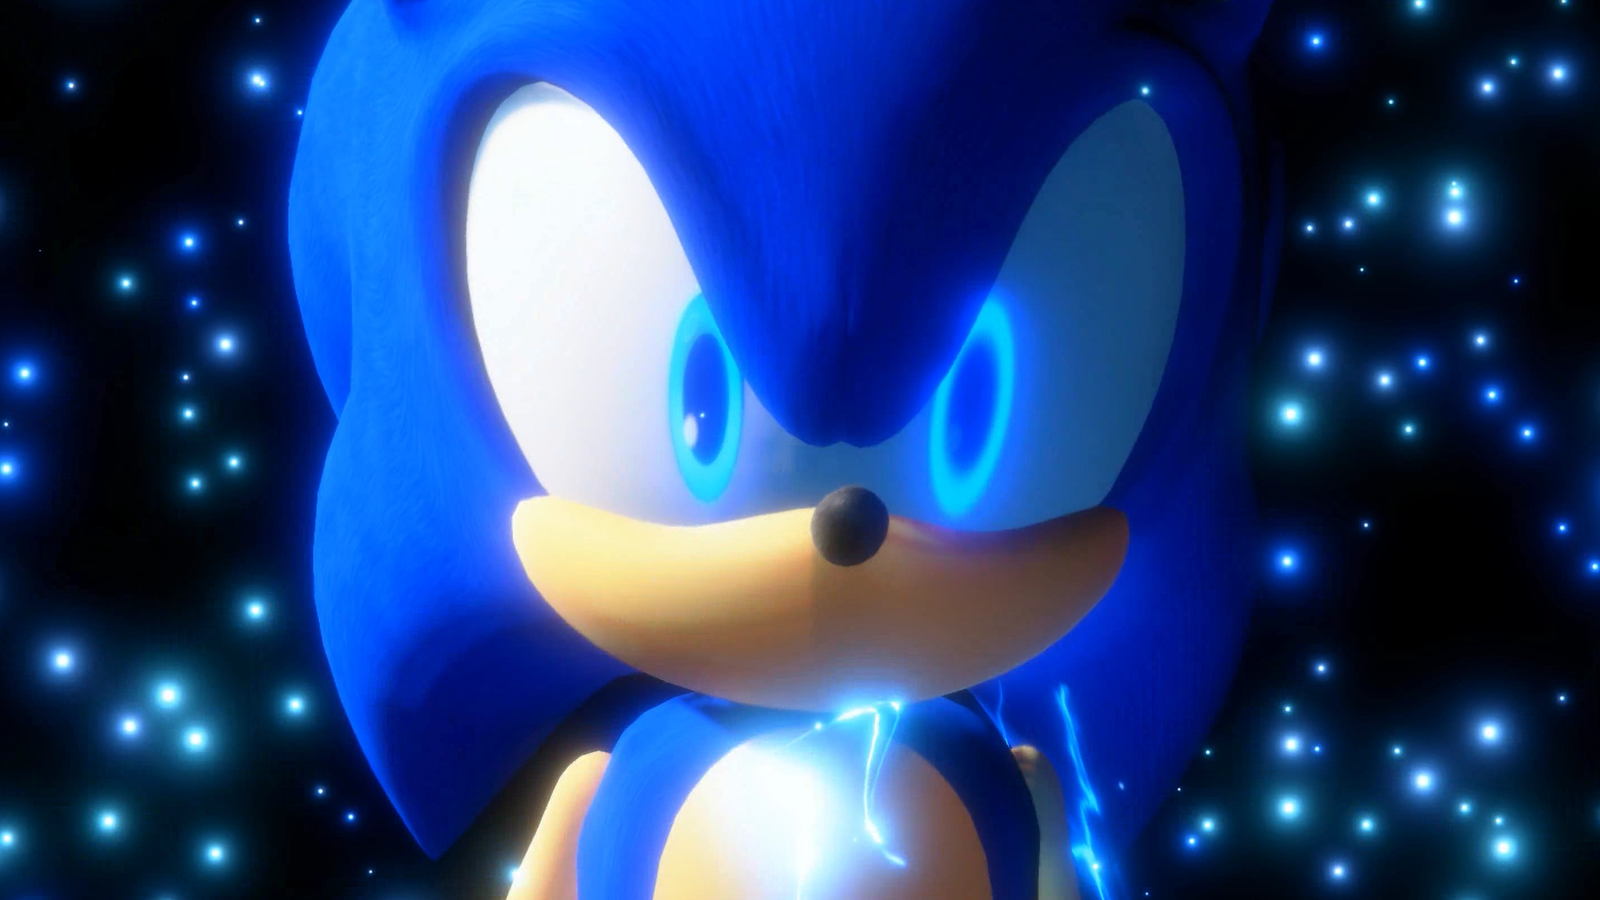 This Adorable Mod Adds Classic Sonic To Sonic Adventure